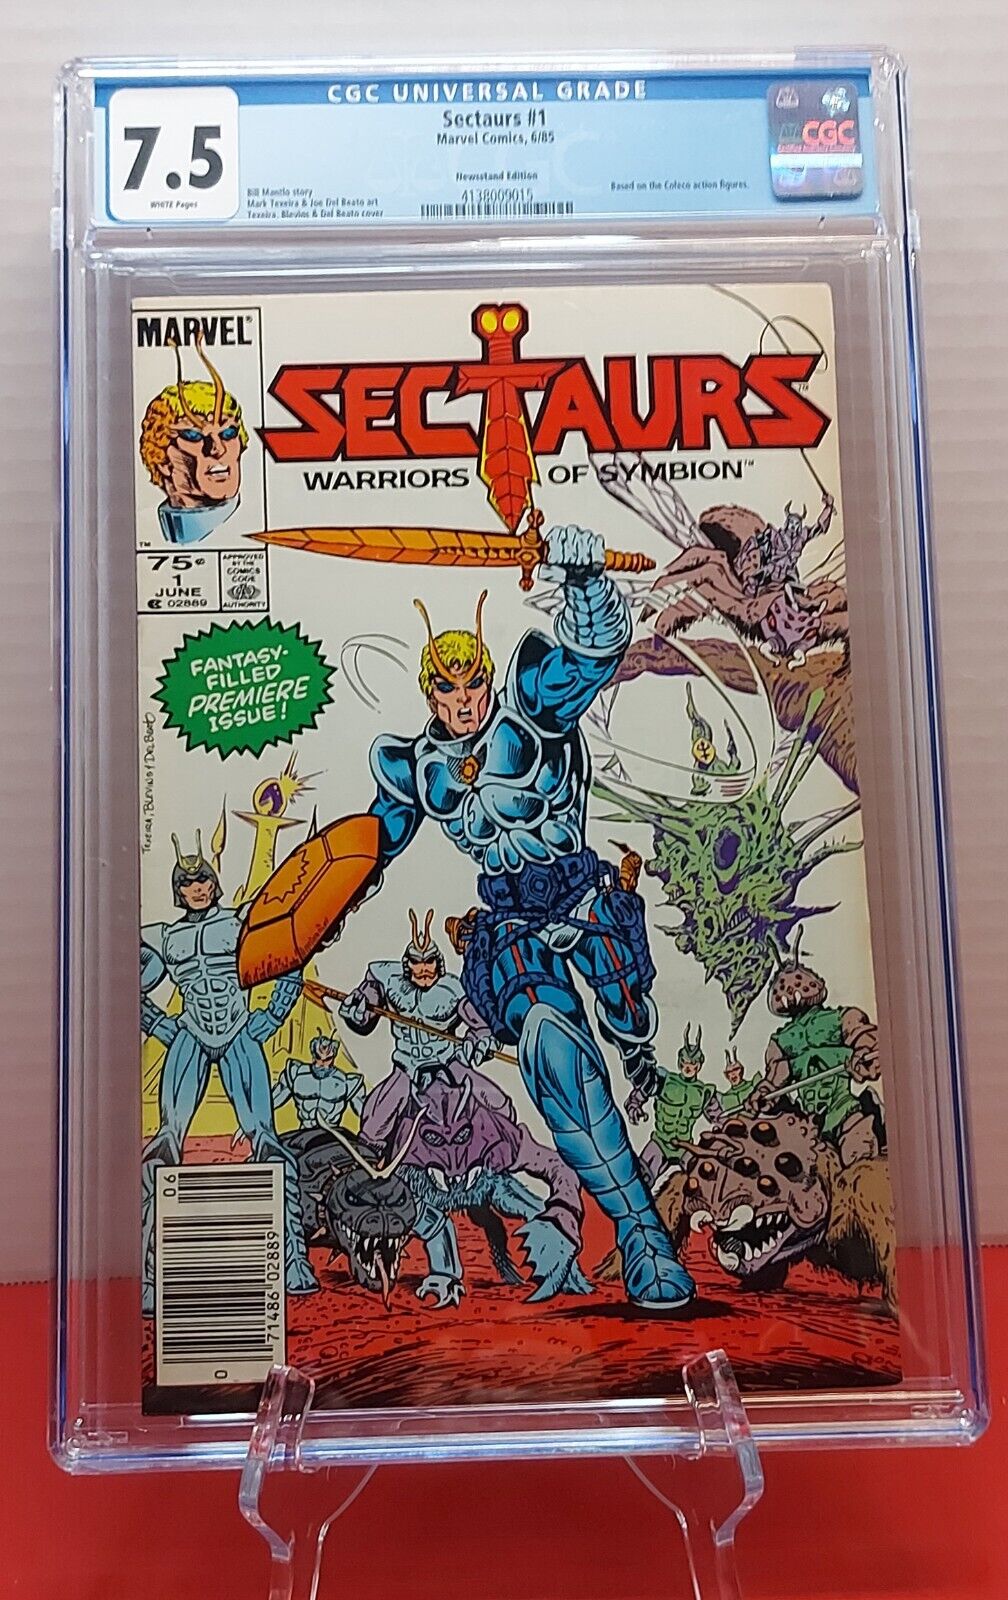 1985 Sectaurs #1 CGC Graded 